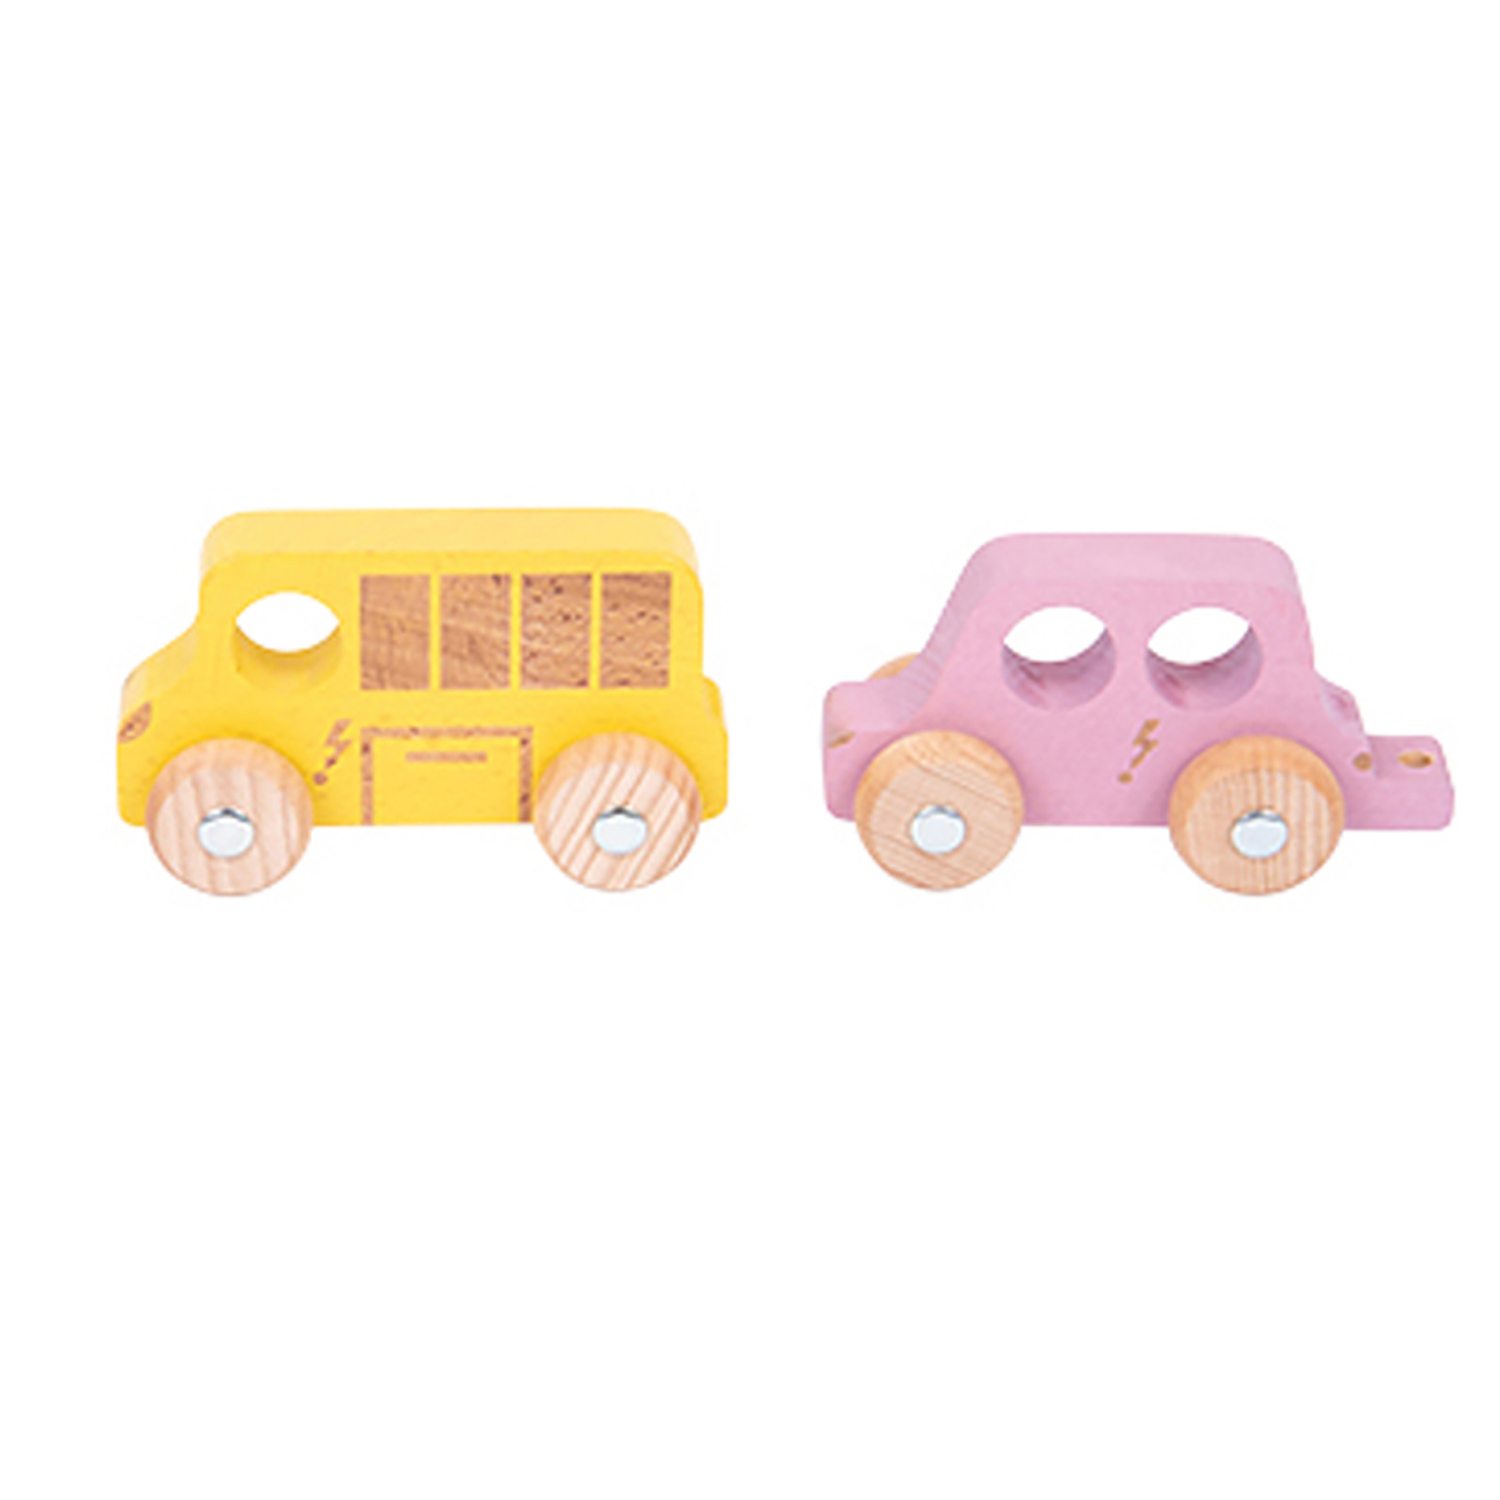 TickiT Rainbow Wooden City E-Vehicles - Set of 3 image number null